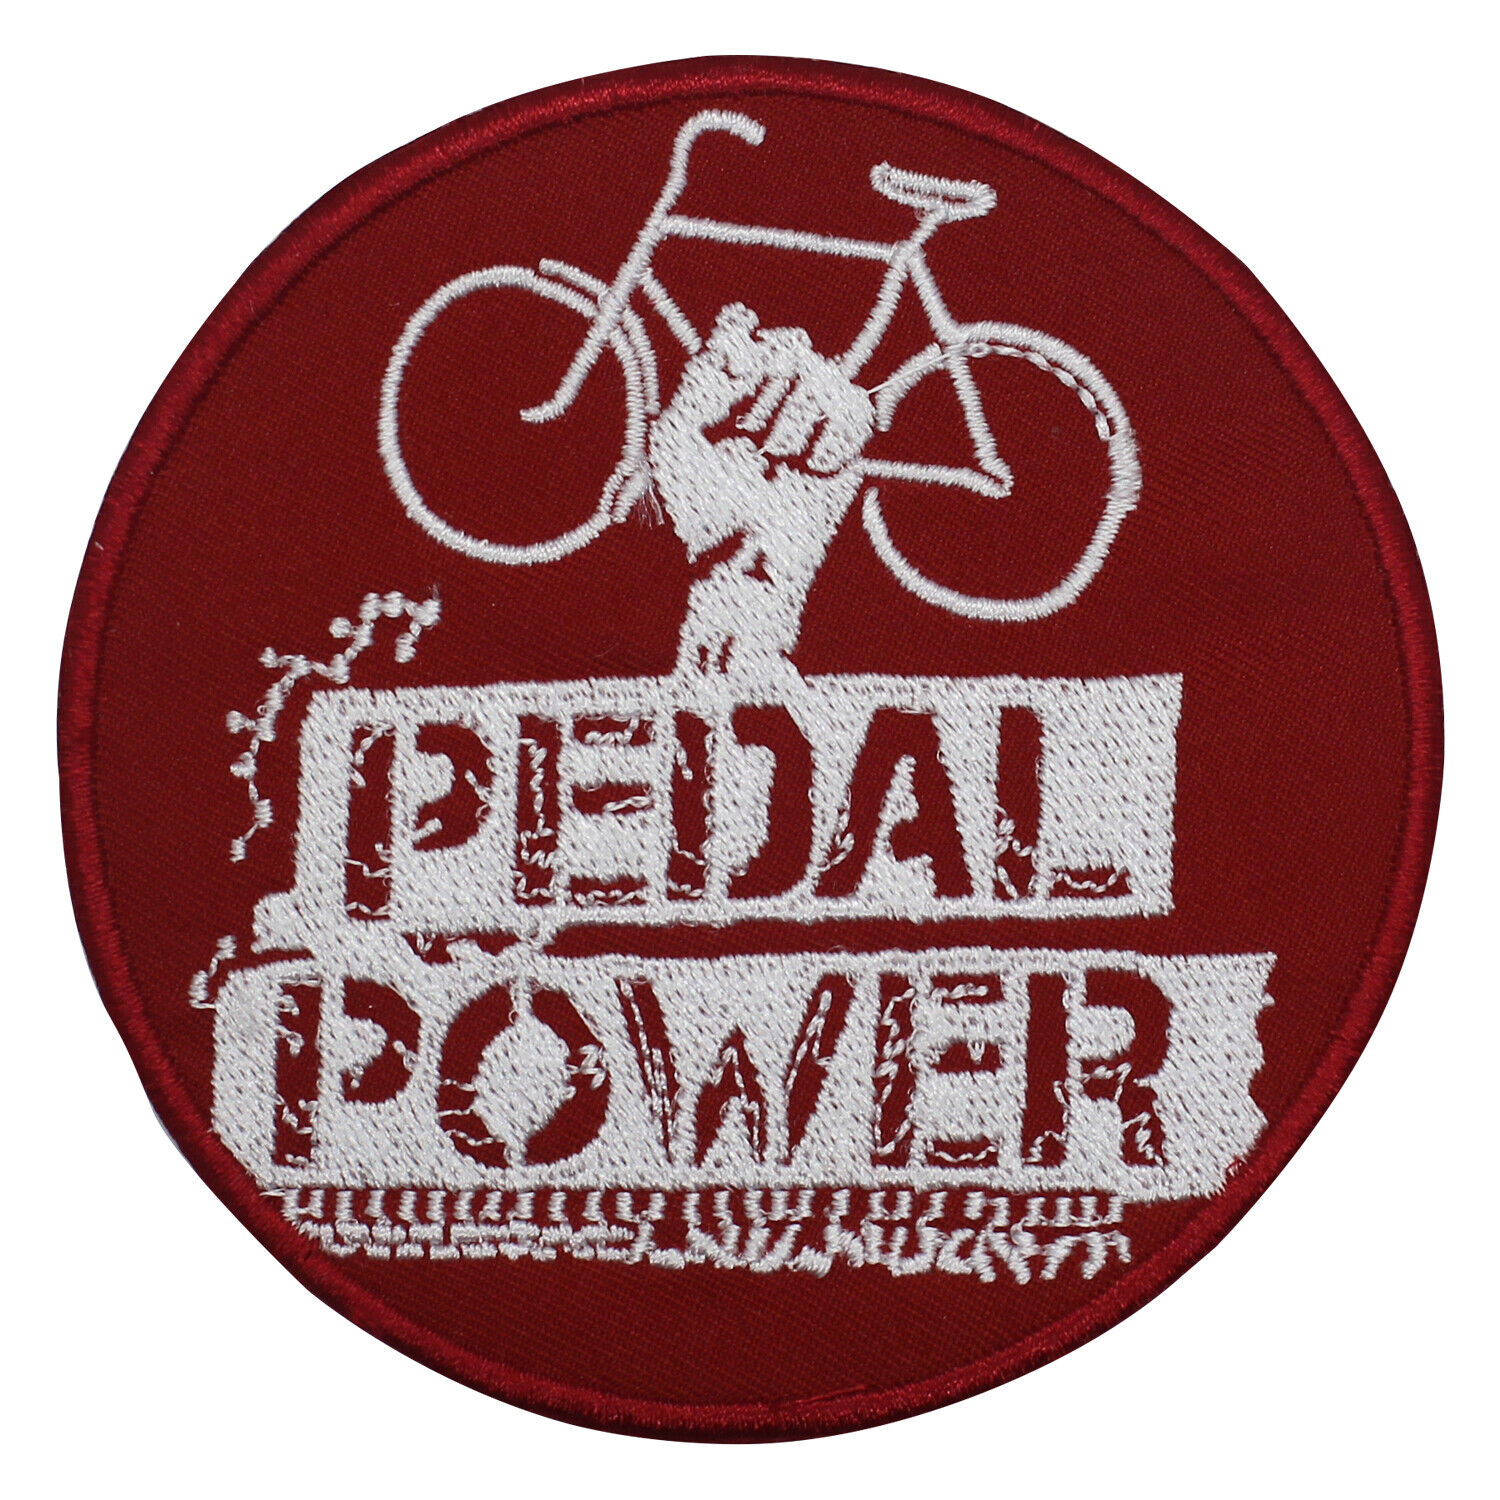 Pedal Power Cyclist Patch Iron On Patch Sew On Badge Patch Embroidery Patch 